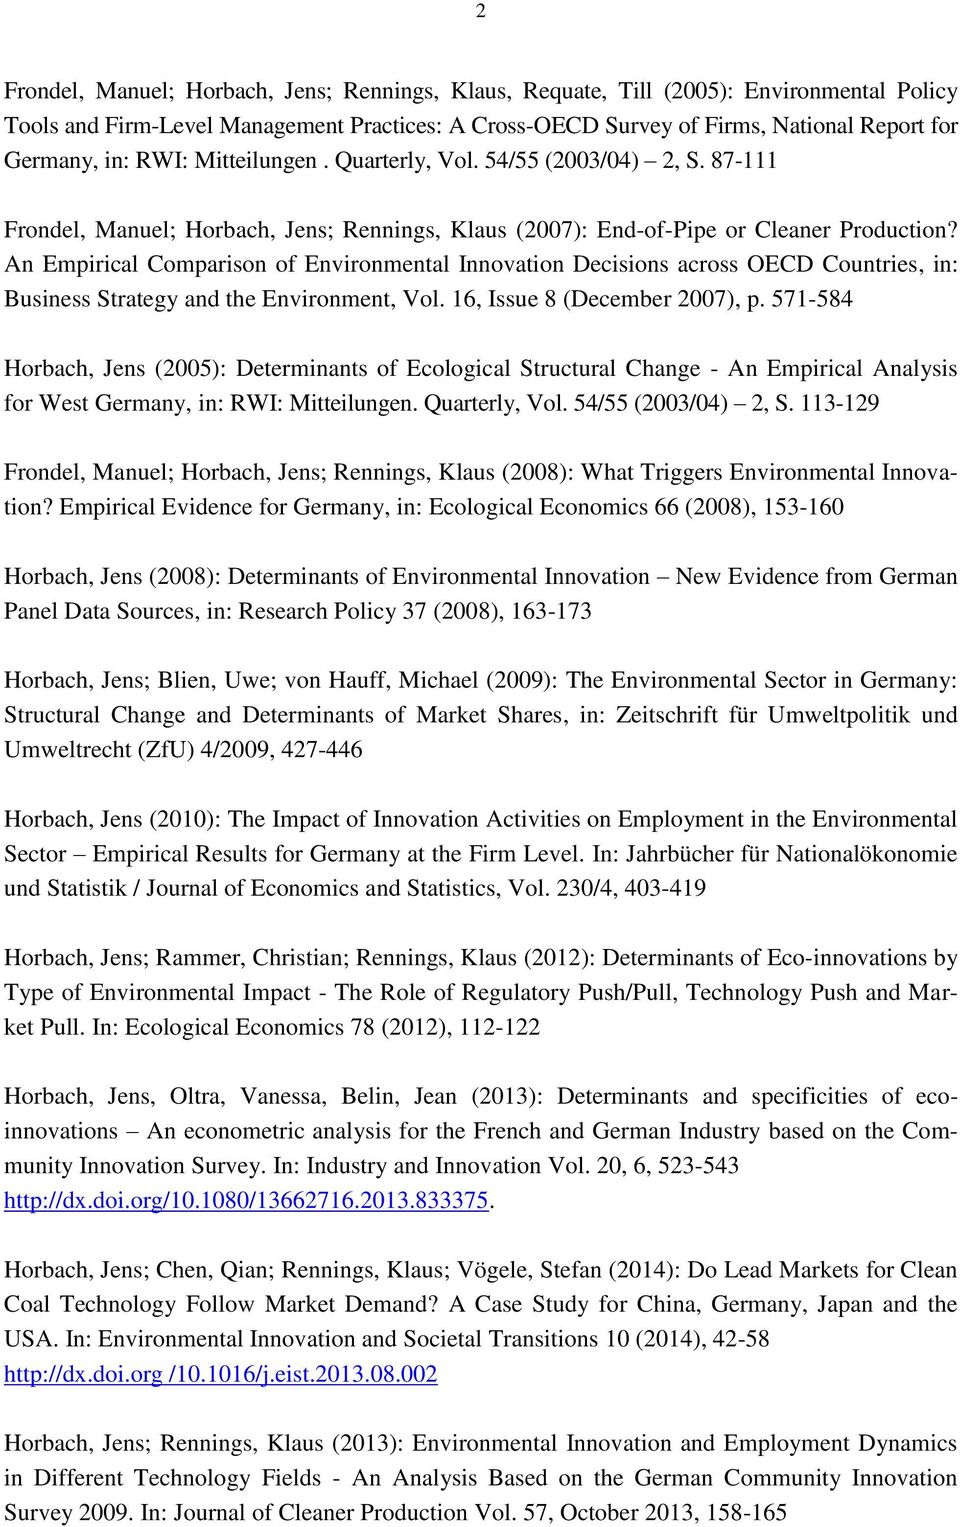 An Empirical Comparison of Environmental Innovation Decisions across OECD Countries, in: Business Strategy and the Environment, Vol. 16, Issue 8 (December 2007), p.